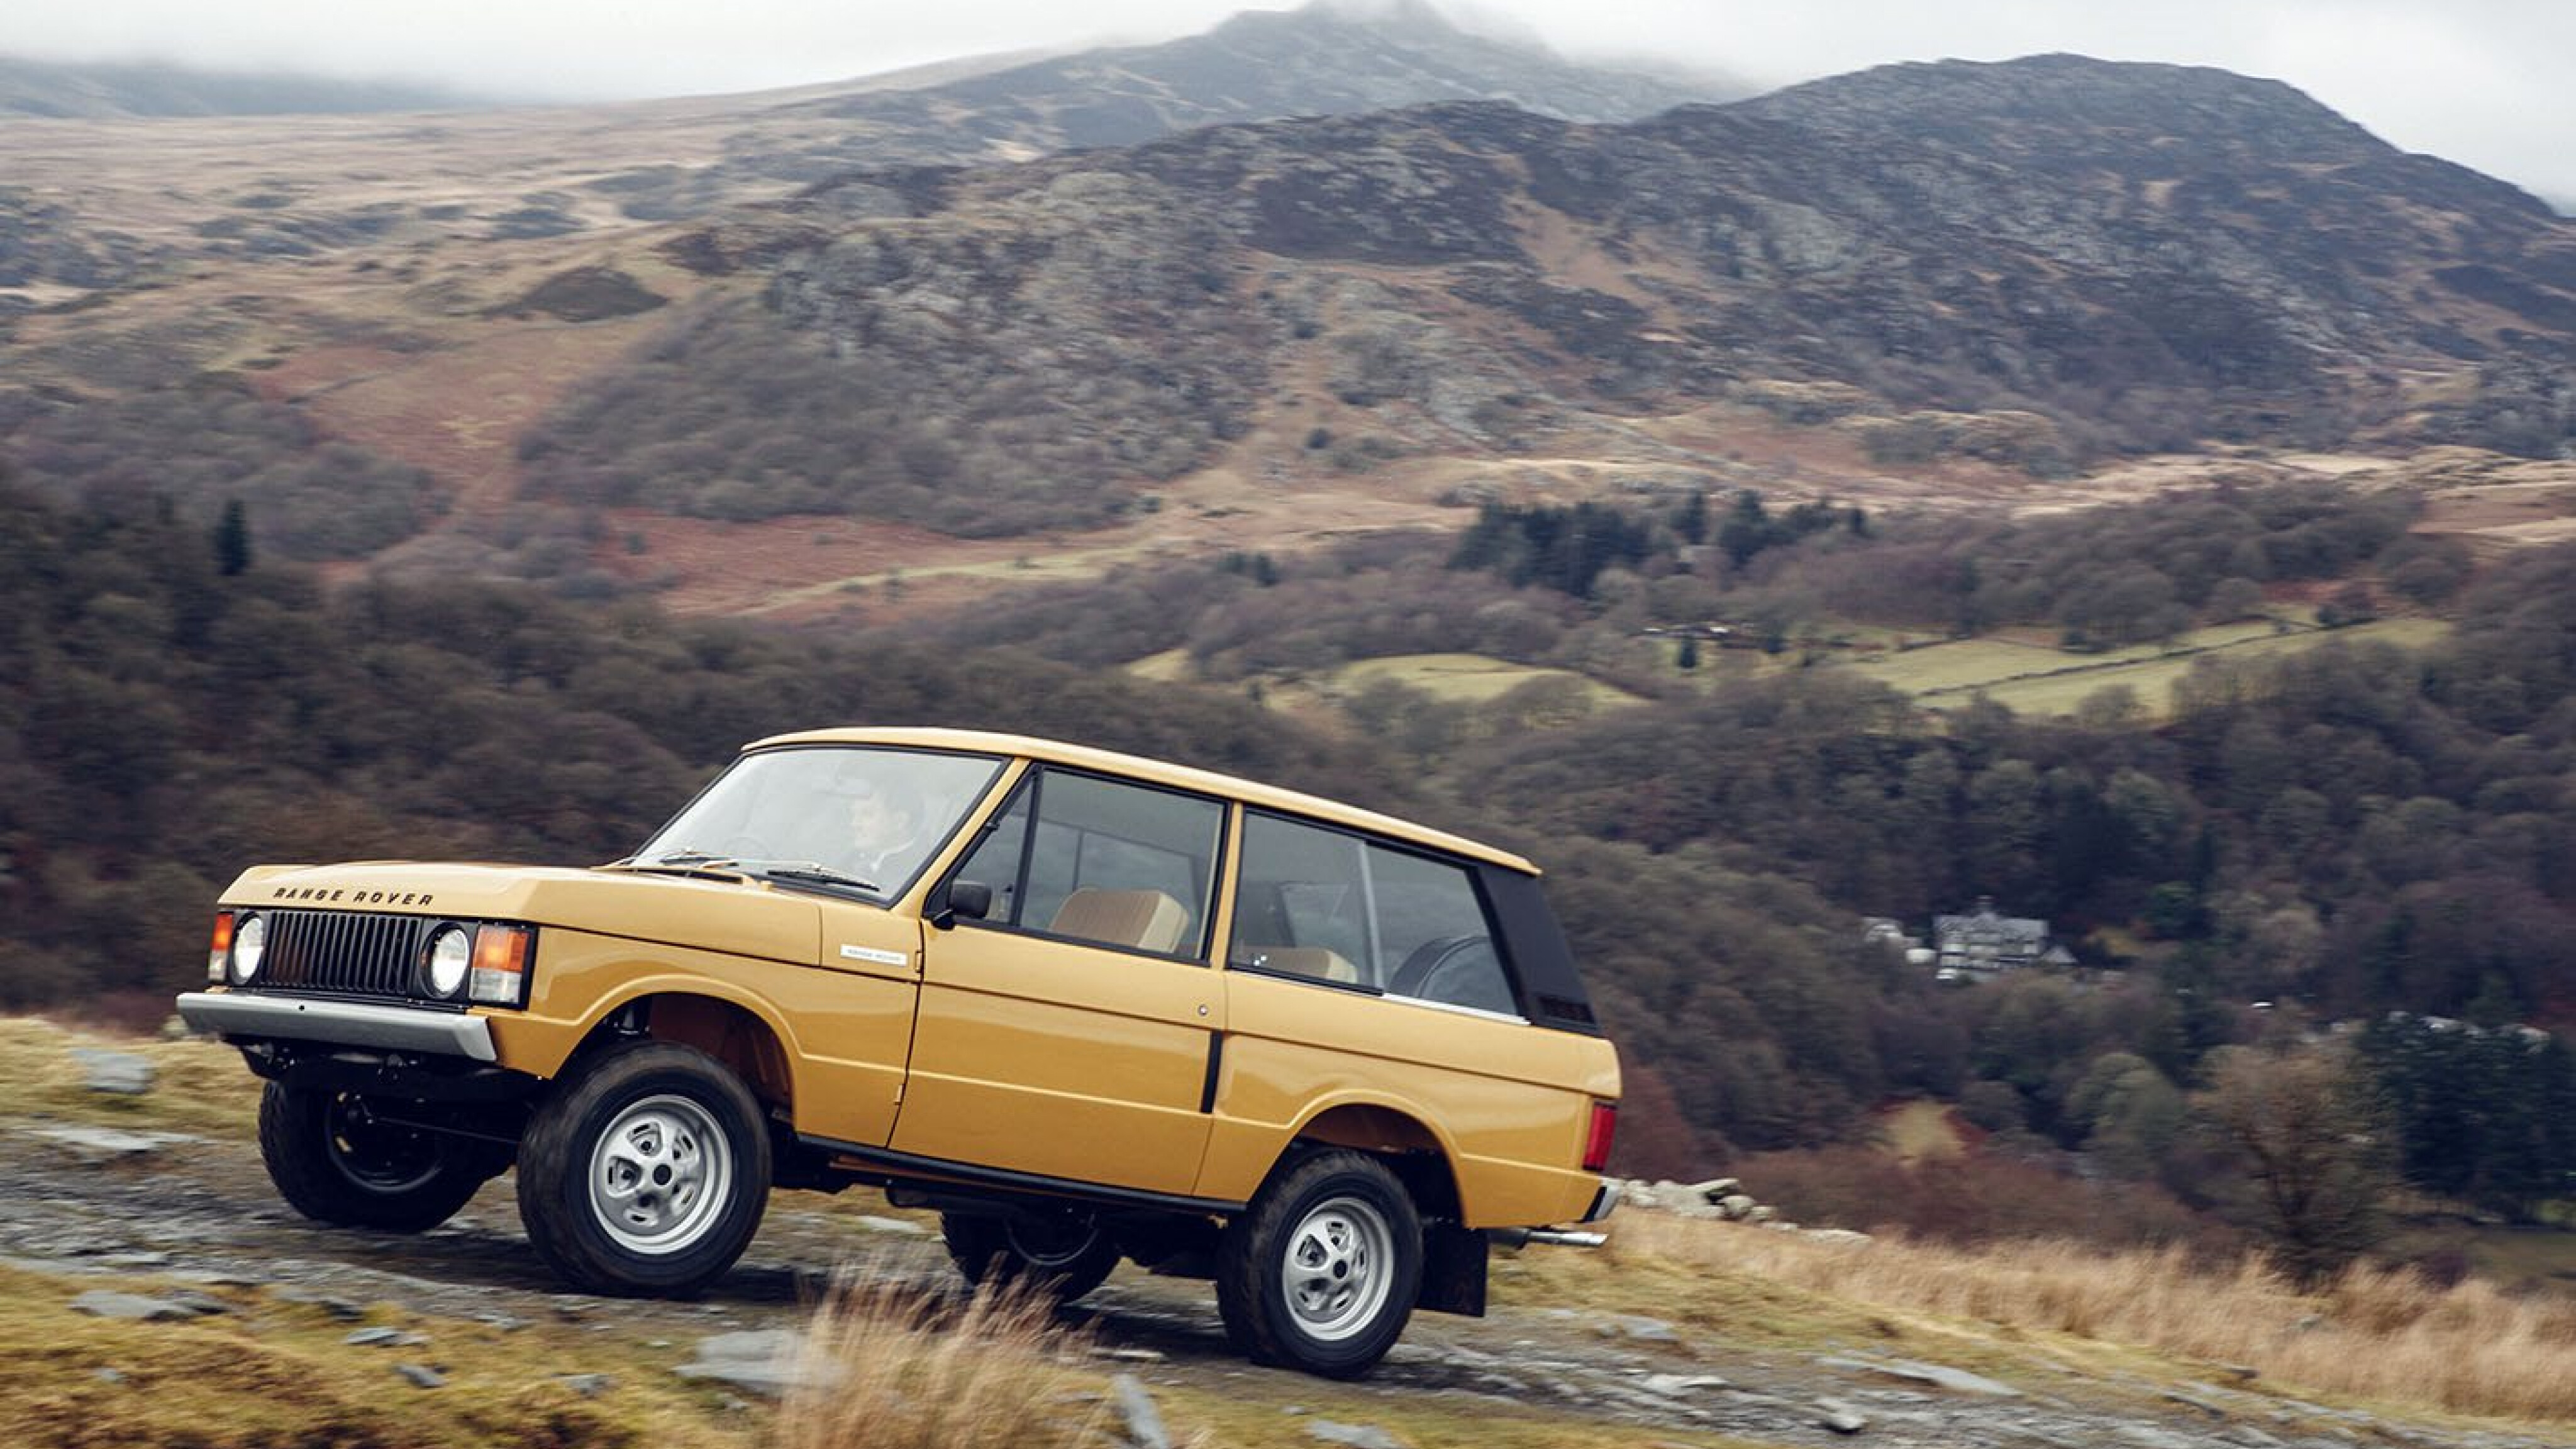 Remembering the rise and fall of MG Rover